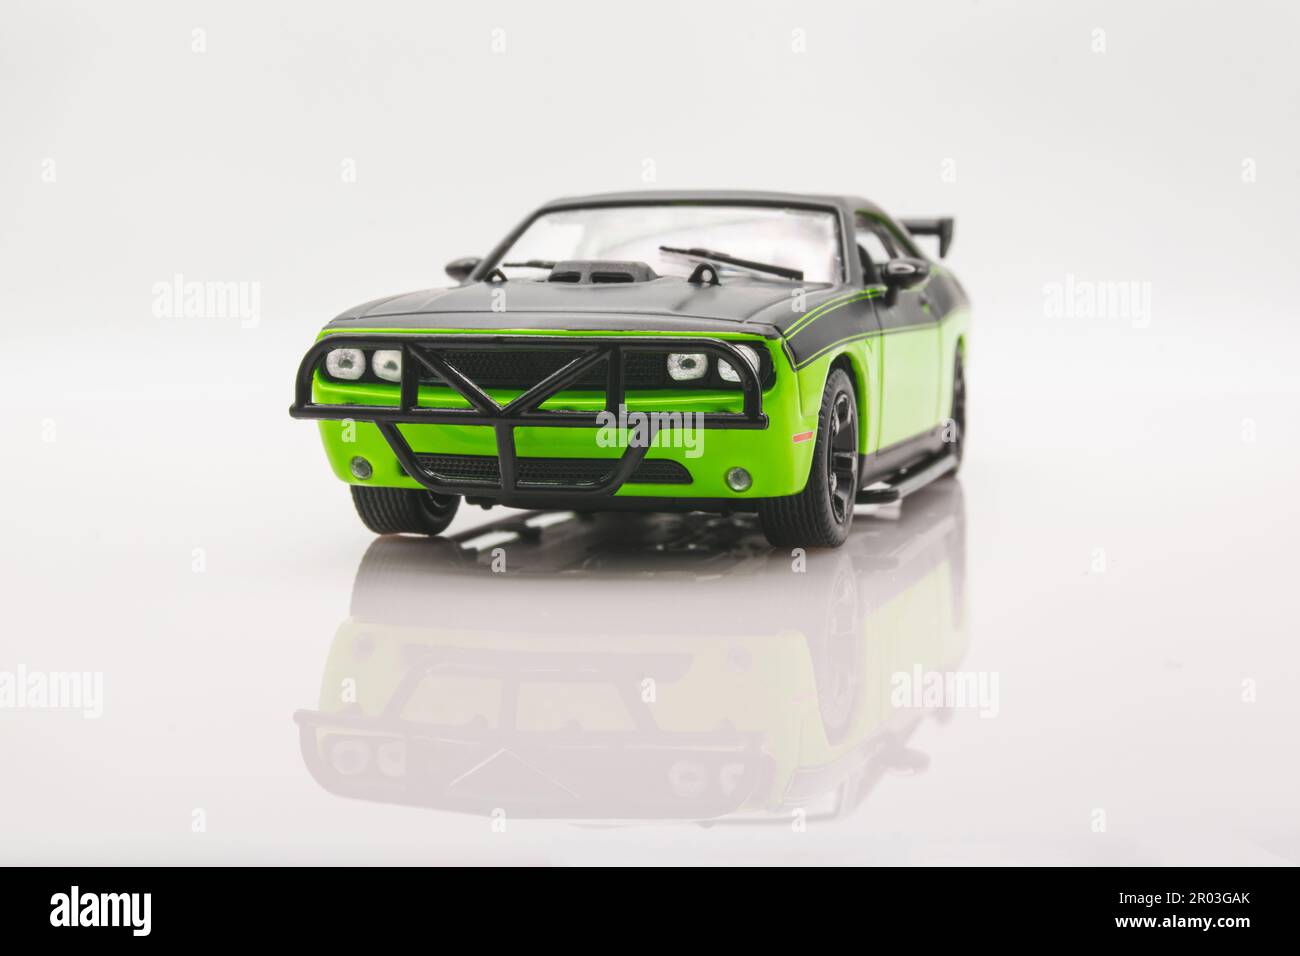 Fast&Furious Dodge Challenger SR 1:43 model car, front view, white background with reflection Stock Photo